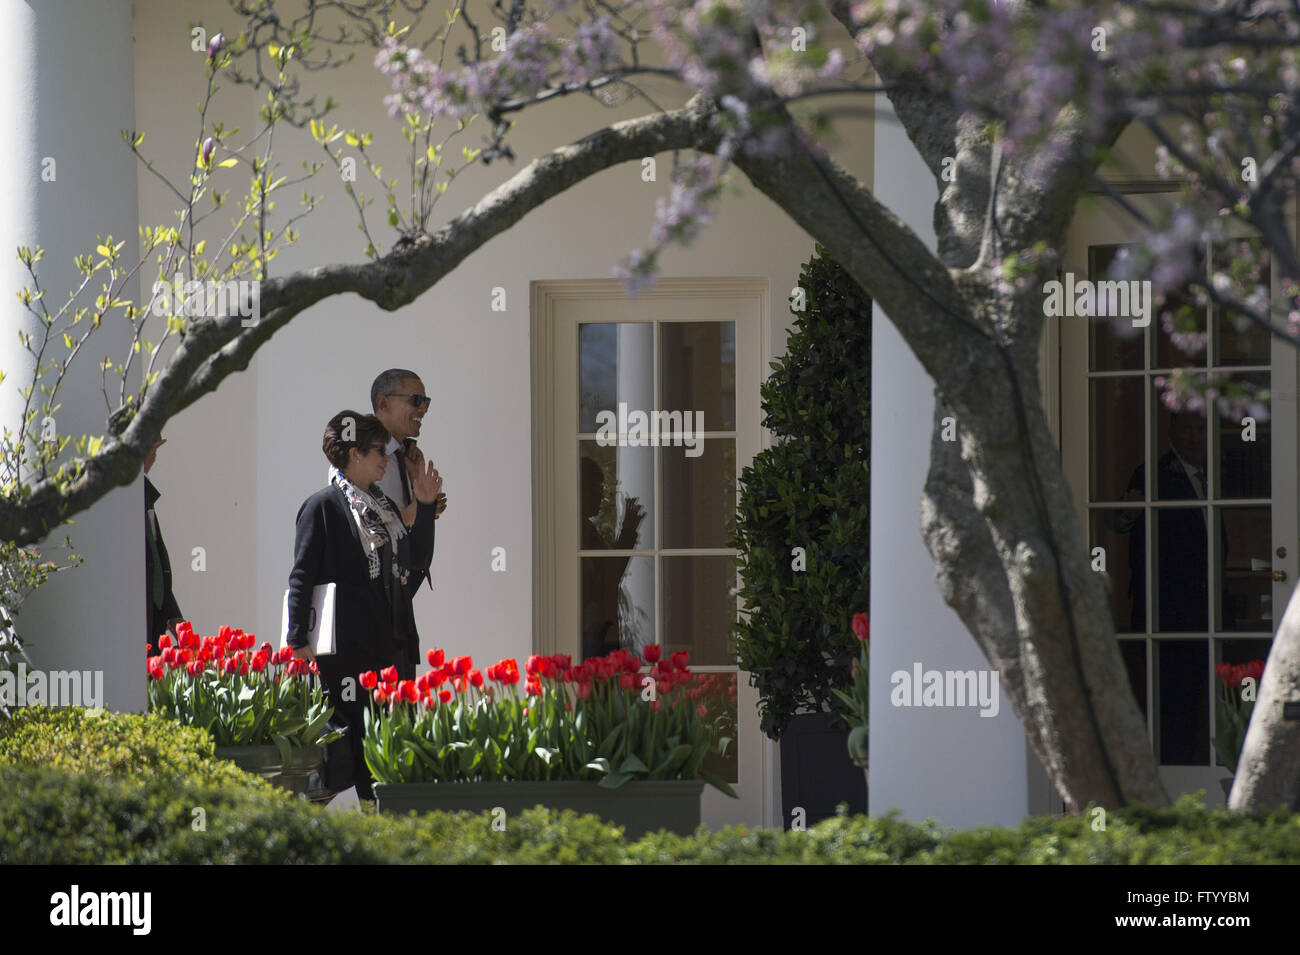 Washington, District of Columbia, USA. 30th Mar, 2016. United States President Barack Obama and Senior Advisor Valerie Jarrett walk to the Oval Office after having lunch with formerly incarcerated individuals who have received commutations, in Washington, DC on March 30, 2016. Credit: Kevin Dietsch/Pool via CNP © Kevin Dietsch/CNP/ZUMA Wire/Alamy Live News Stock Photo